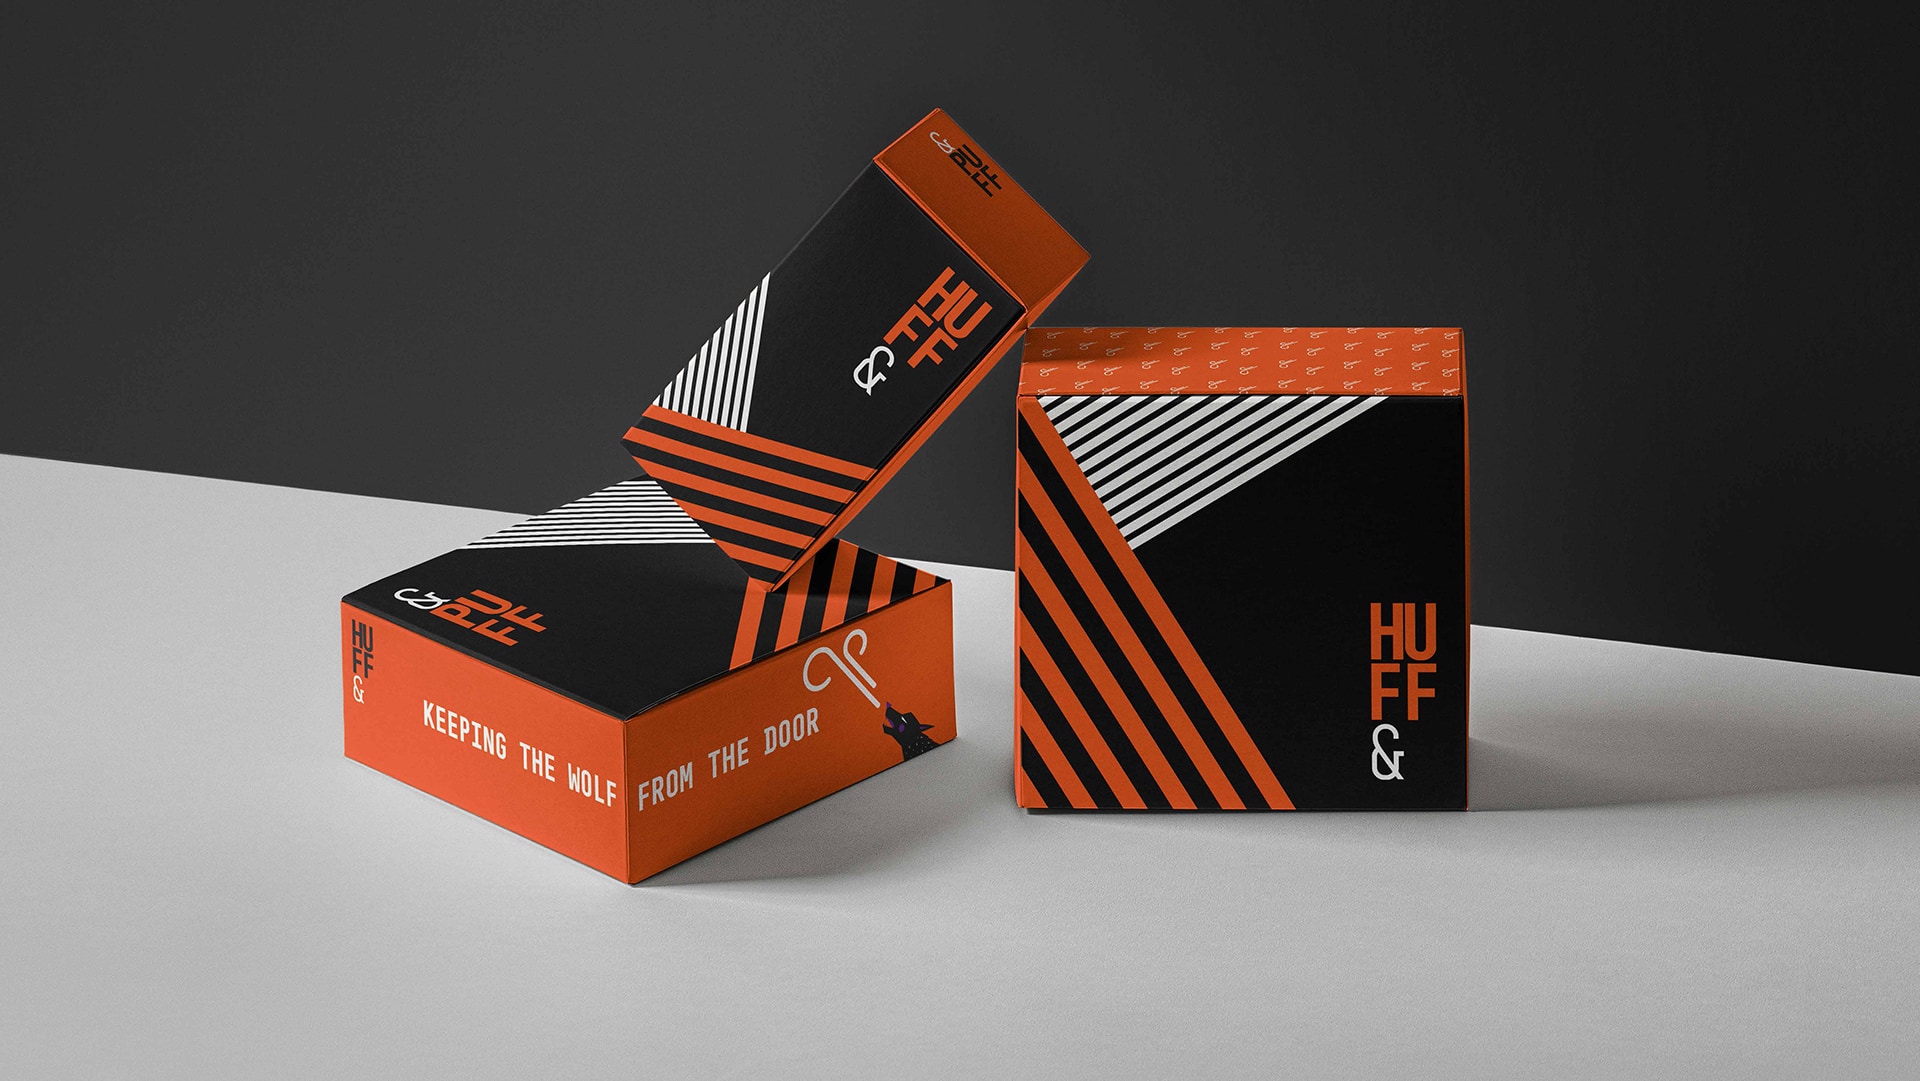 An image of a packaging displaying the Huff and Puff B2B branding